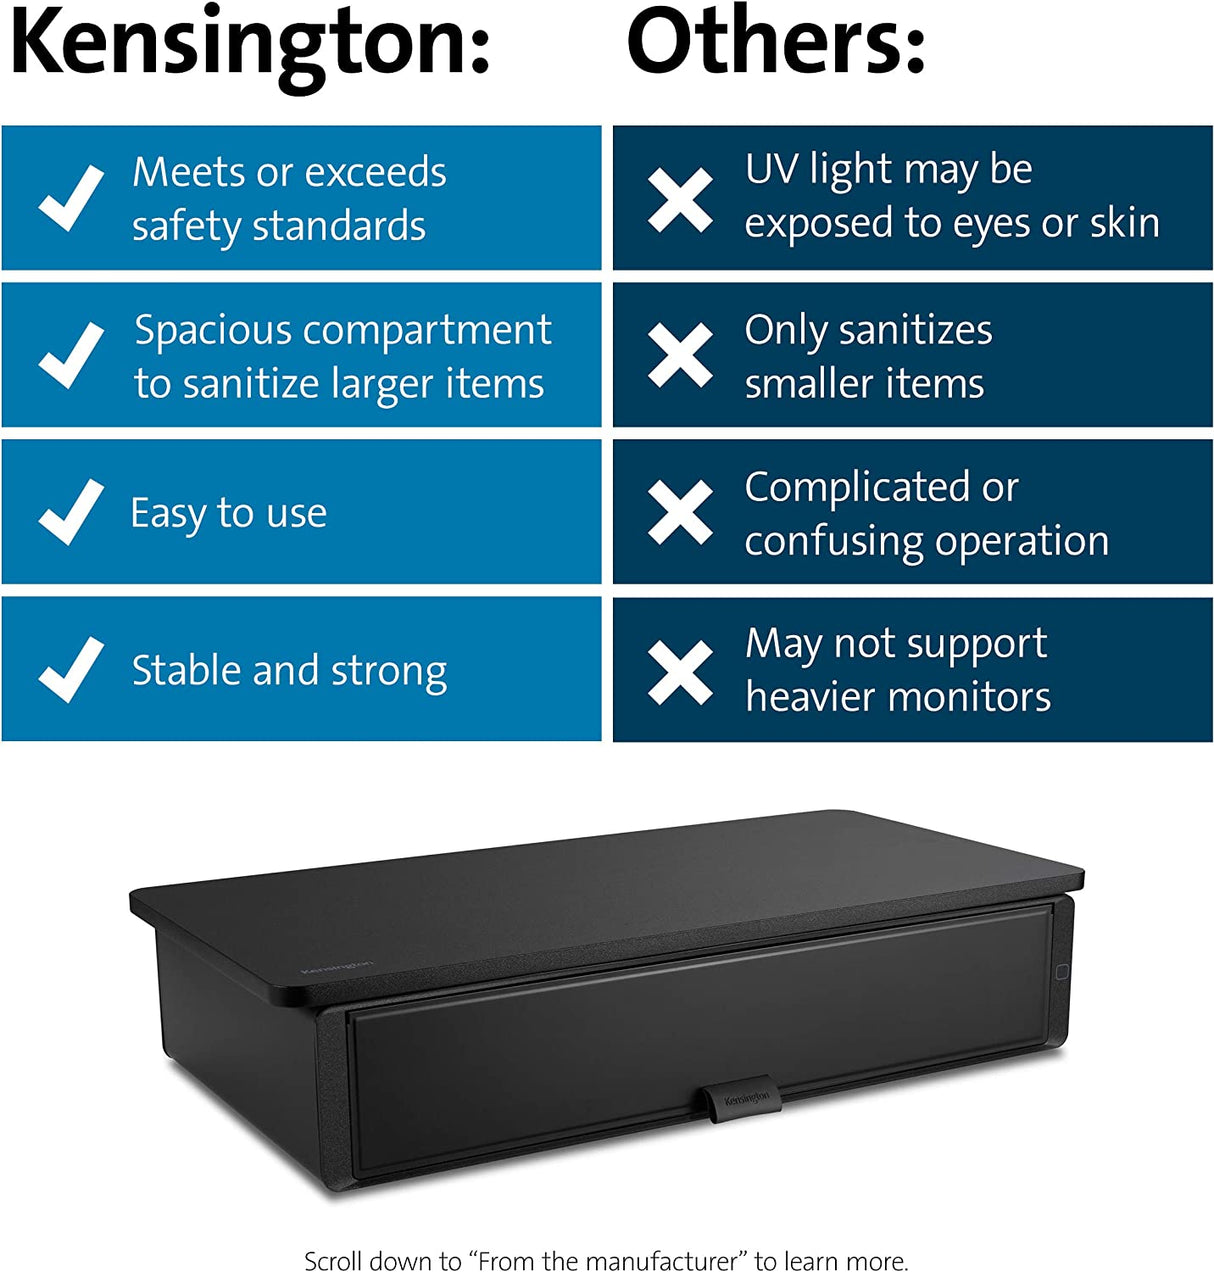 Kensington UVStand™ Monitor Stand with UV Disinfection Compartment –Black (K55100WW)